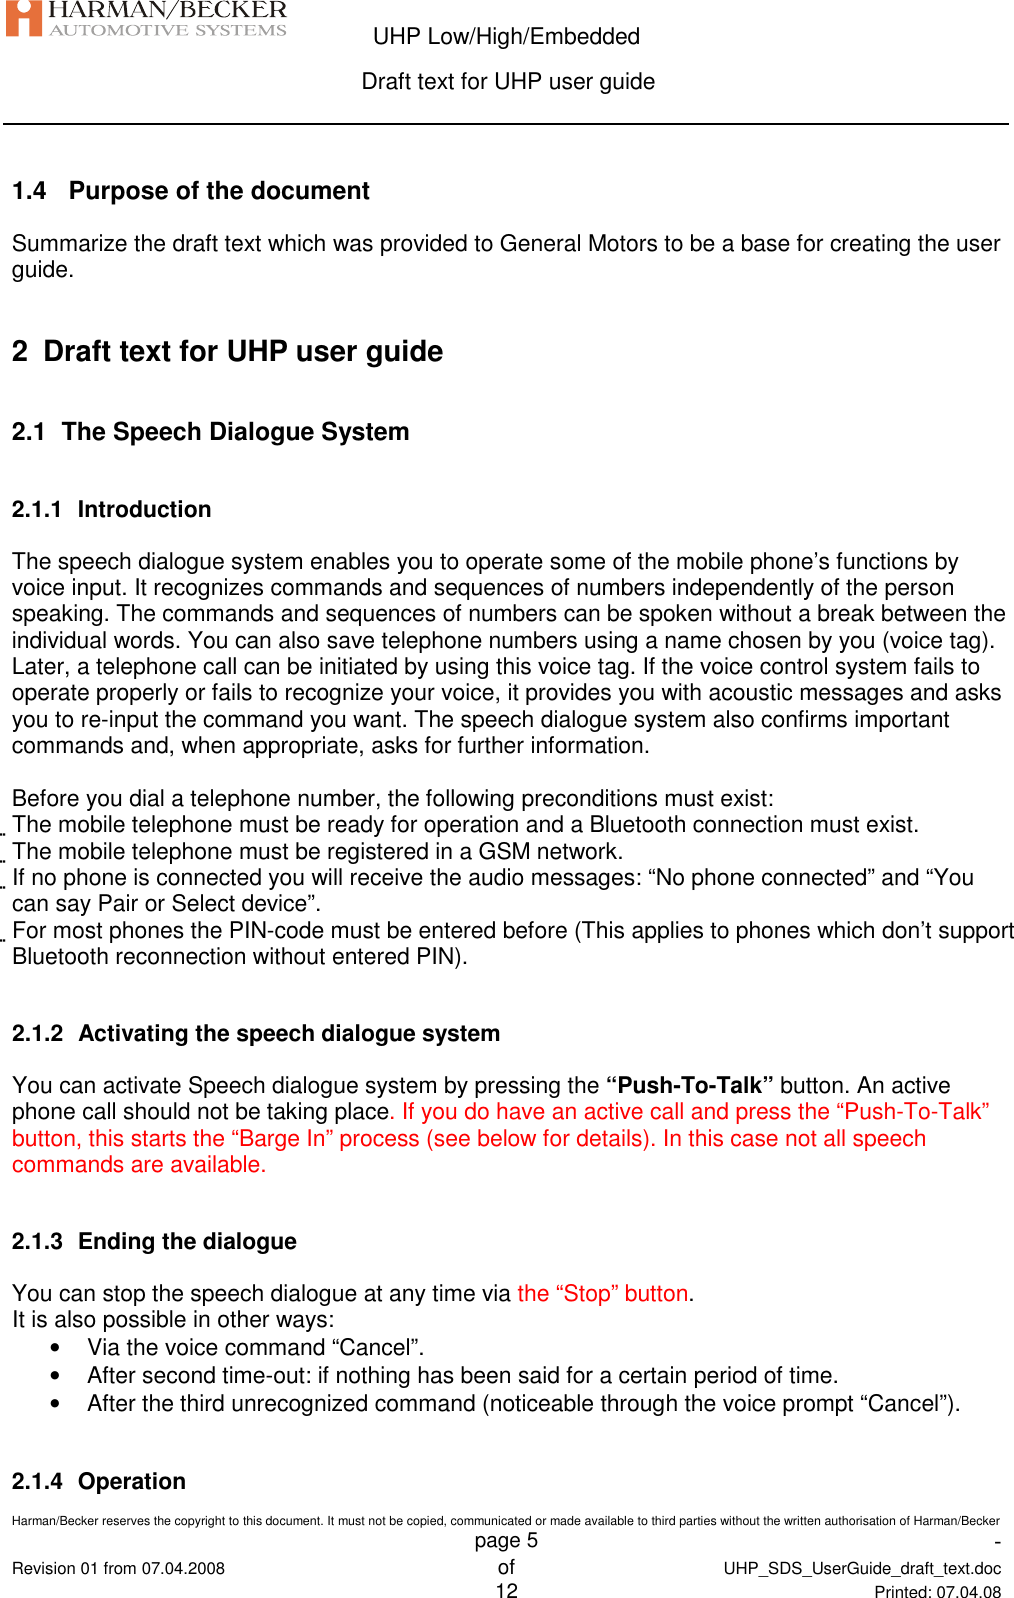  UHP Low/High/Embedded  Draft text for UHP user guide  Harman/Becker reserves the copyright to this document. It must not be copied, communicated or made available to third parties without the written authorisation of Harman/Becker   page 5  -  Revision 01 from 07.04.2008 of  UHP_SDS_UserGuide_draft_text.doc  12 Printed: 07.04.08  1.4   Purpose of the document Summarize the draft text which was provided to General Motors to be a base for creating the user guide.  2  Draft text for UHP user guide 2.1  The Speech Dialogue System 2.1.1  Introduction The speech dialogue system enables you to operate some of the mobile phone’s functions by voice input. It recognizes commands and sequences of numbers independently of the person speaking. The commands and sequences of numbers can be spoken without a break between the individual words. You can also save telephone numbers using a name chosen by you (voice tag). Later, a telephone call can be initiated by using this voice tag. If the voice control system fails to operate properly or fails to recognize your voice, it provides you with acoustic messages and asks you to re-input the command you want. The speech dialogue system also confirms important commands and, when appropriate, asks for further information.  Before you dial a telephone number, the following preconditions must exist: The mobile telephone must be ready for operation and a Bluetooth connection must exist. The mobile telephone must be registered in a GSM network. If no phone is connected you will receive the audio messages: “No phone connected” and “You can say Pair or Select device”. For most phones the PIN-code must be entered before (This applies to phones which don’t support Bluetooth reconnection without entered PIN).  2.1.2  Activating the speech dialogue system You can activate Speech dialogue system by pressing the “Push-To-Talk” button. An active phone call should not be taking place. If you do have an active call and press the “Push-To-Talk” button, this starts the “Barge In” process (see below for details). In this case not all speech commands are available.  2.1.3  Ending the dialogue You can stop the speech dialogue at any time via the “Stop” button. It is also possible in other ways: •  Via the voice command “Cancel”. •  After second time-out: if nothing has been said for a certain period of time. •  After the third unrecognized command (noticeable through the voice prompt “Cancel”).  2.1.4  Operation 